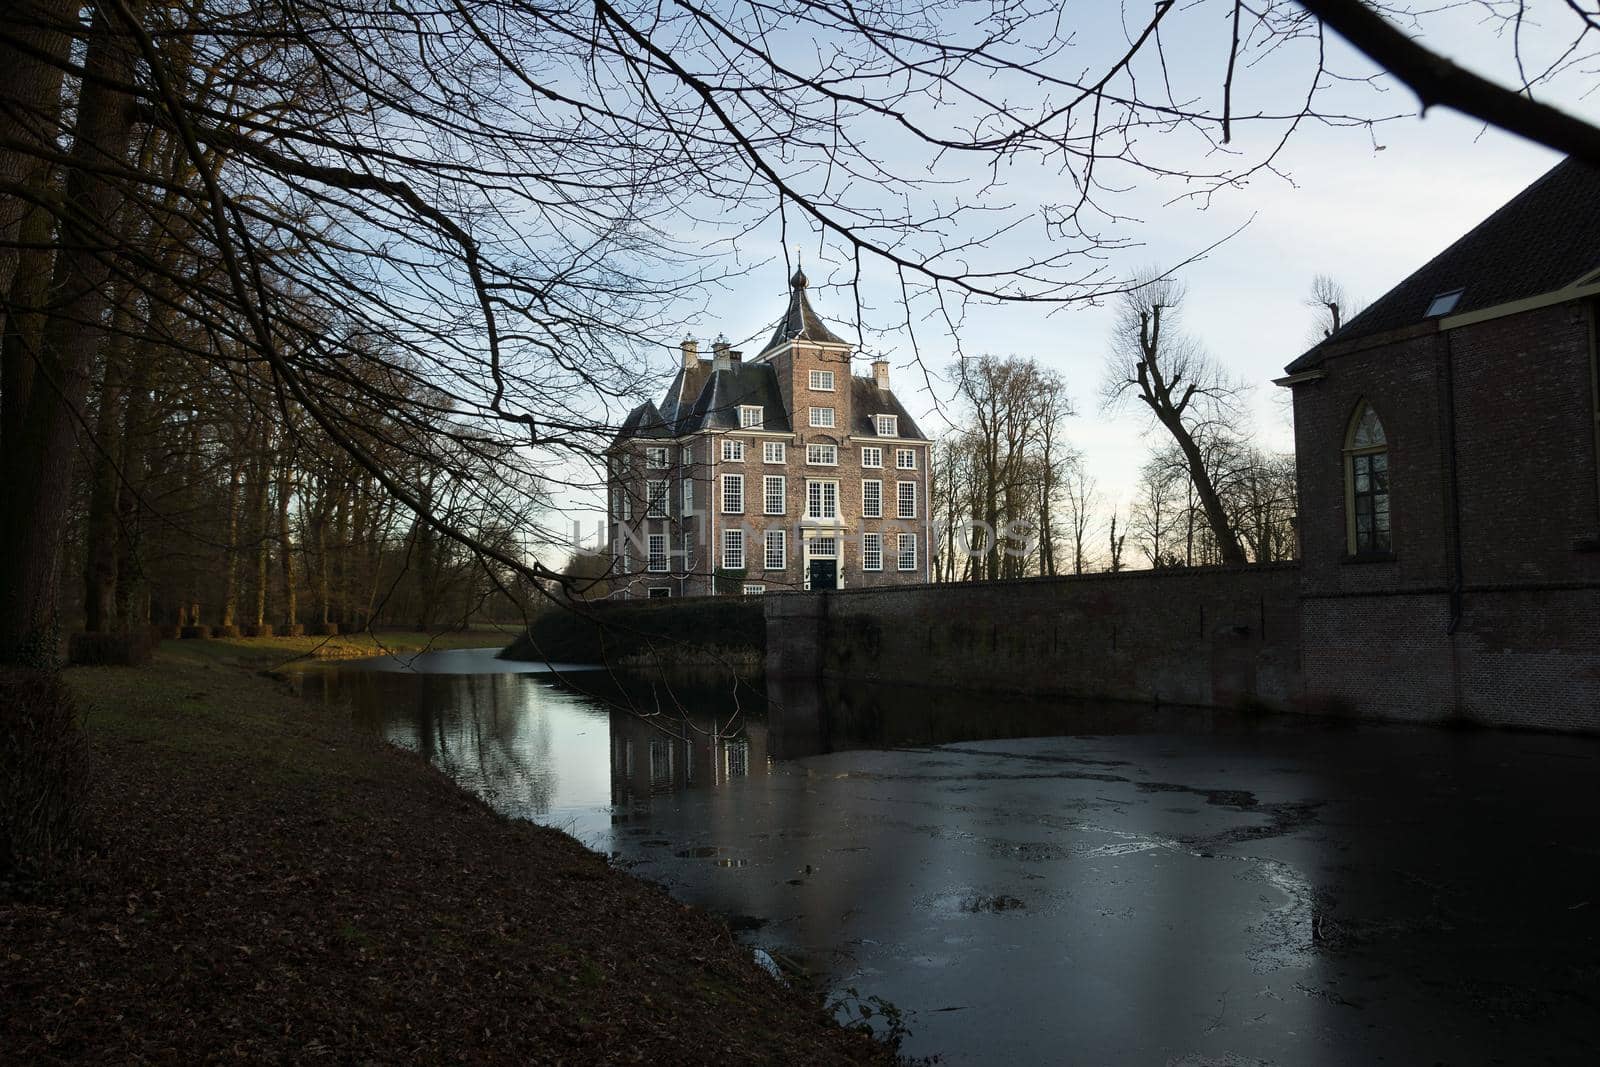 View of medieval castle Soelen in the evening illuminated by the evening sun in wintertime